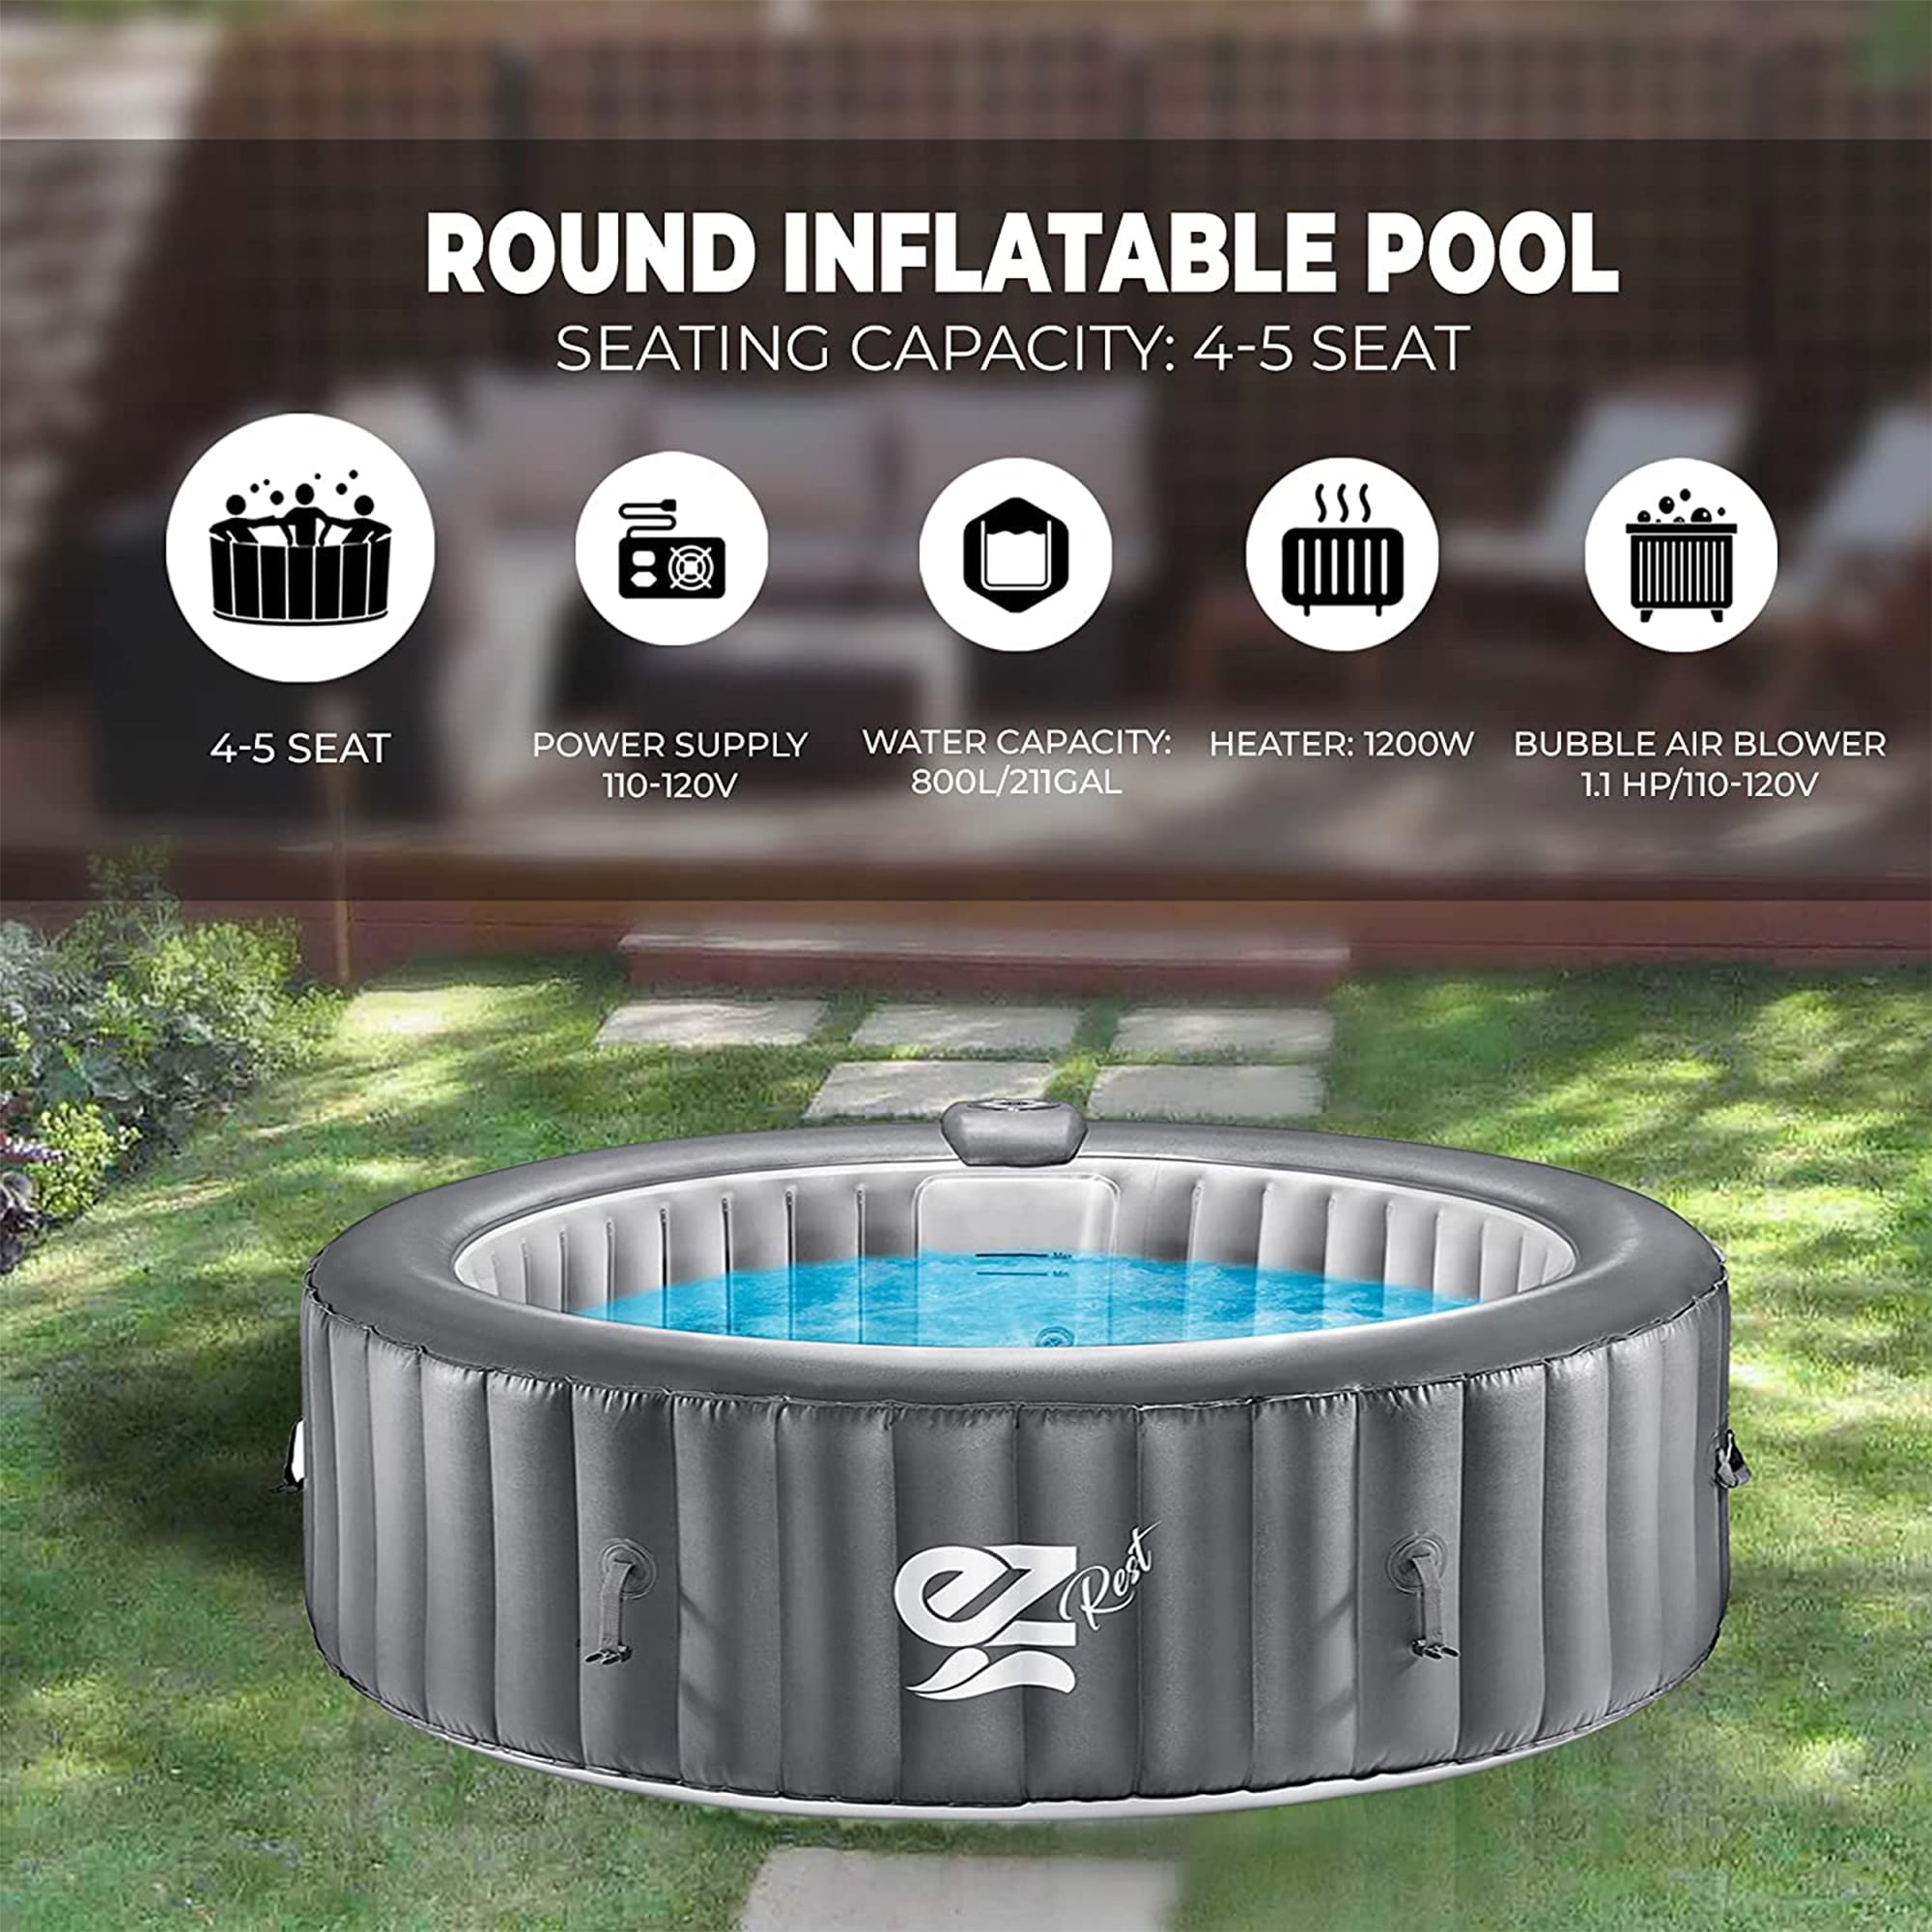 SereneLife 82-in x 25-in 5-Person Inflatable Round Hot Tub at Lowes.com